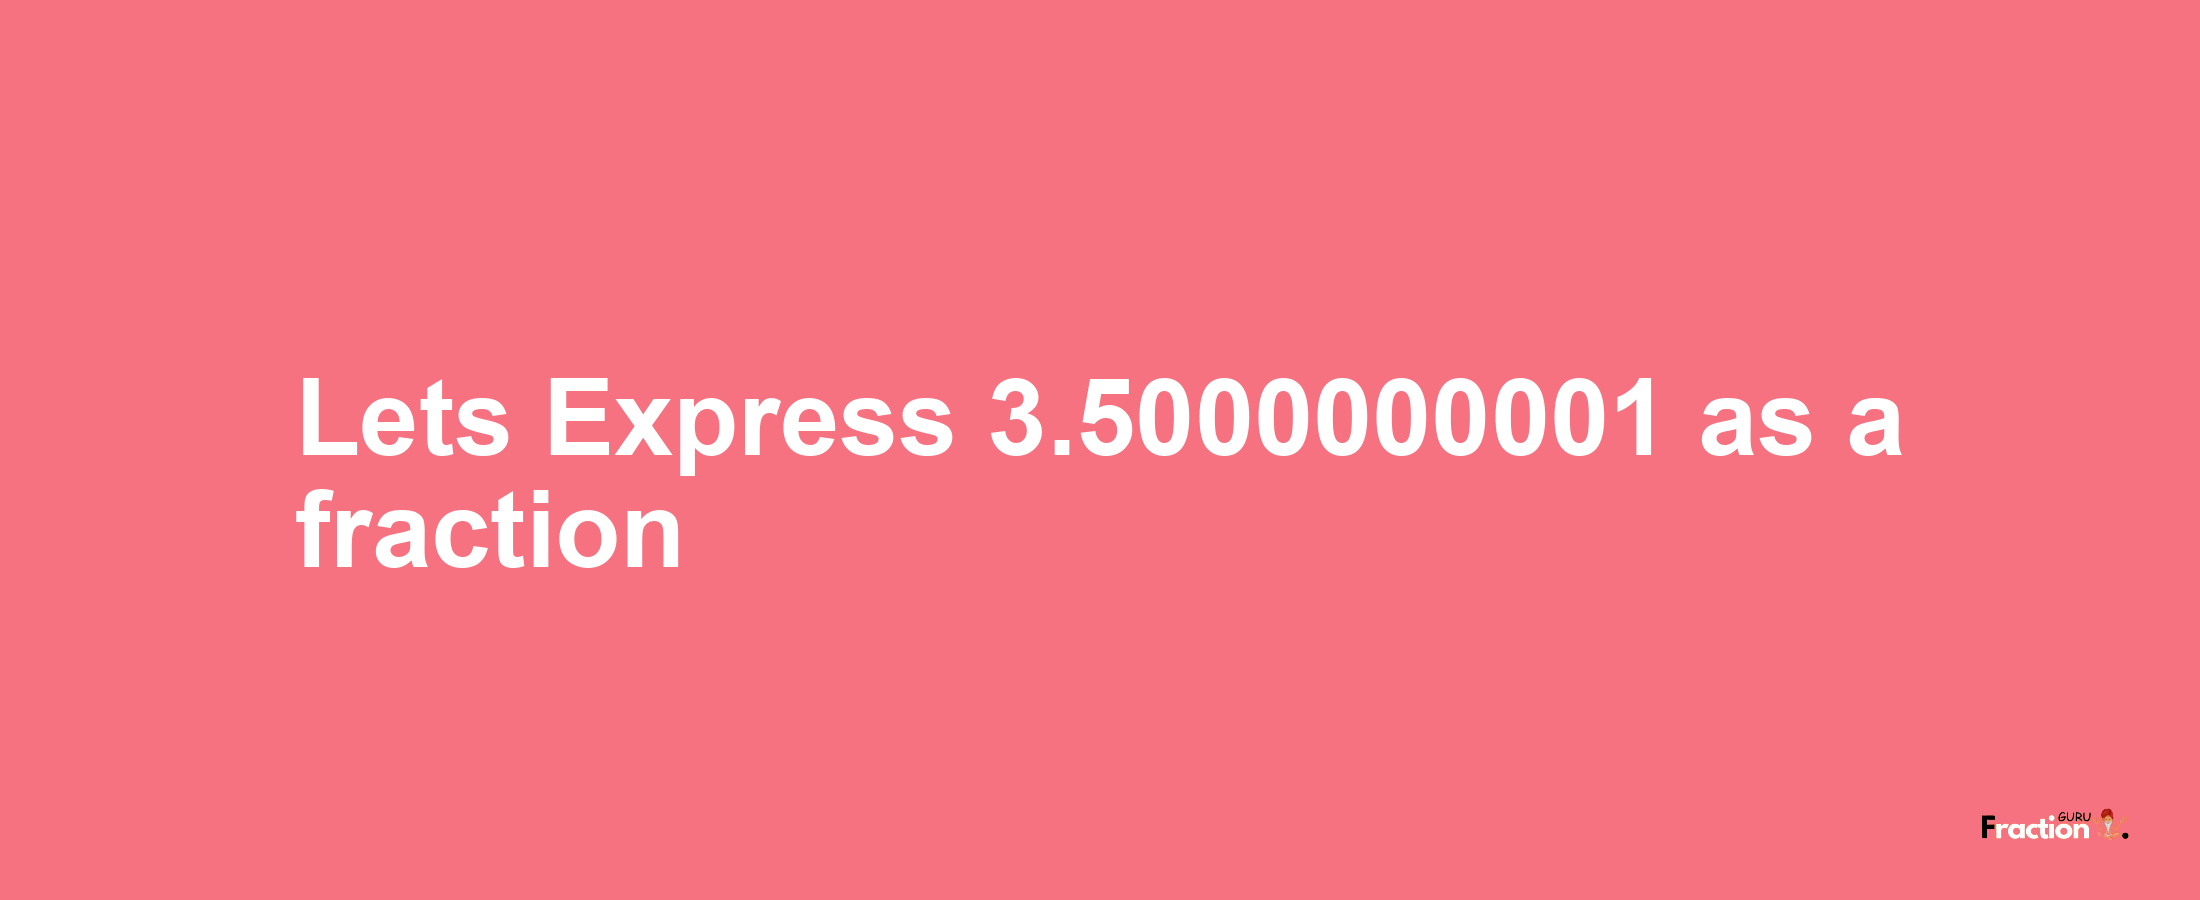 Lets Express 3.5000000001 as afraction